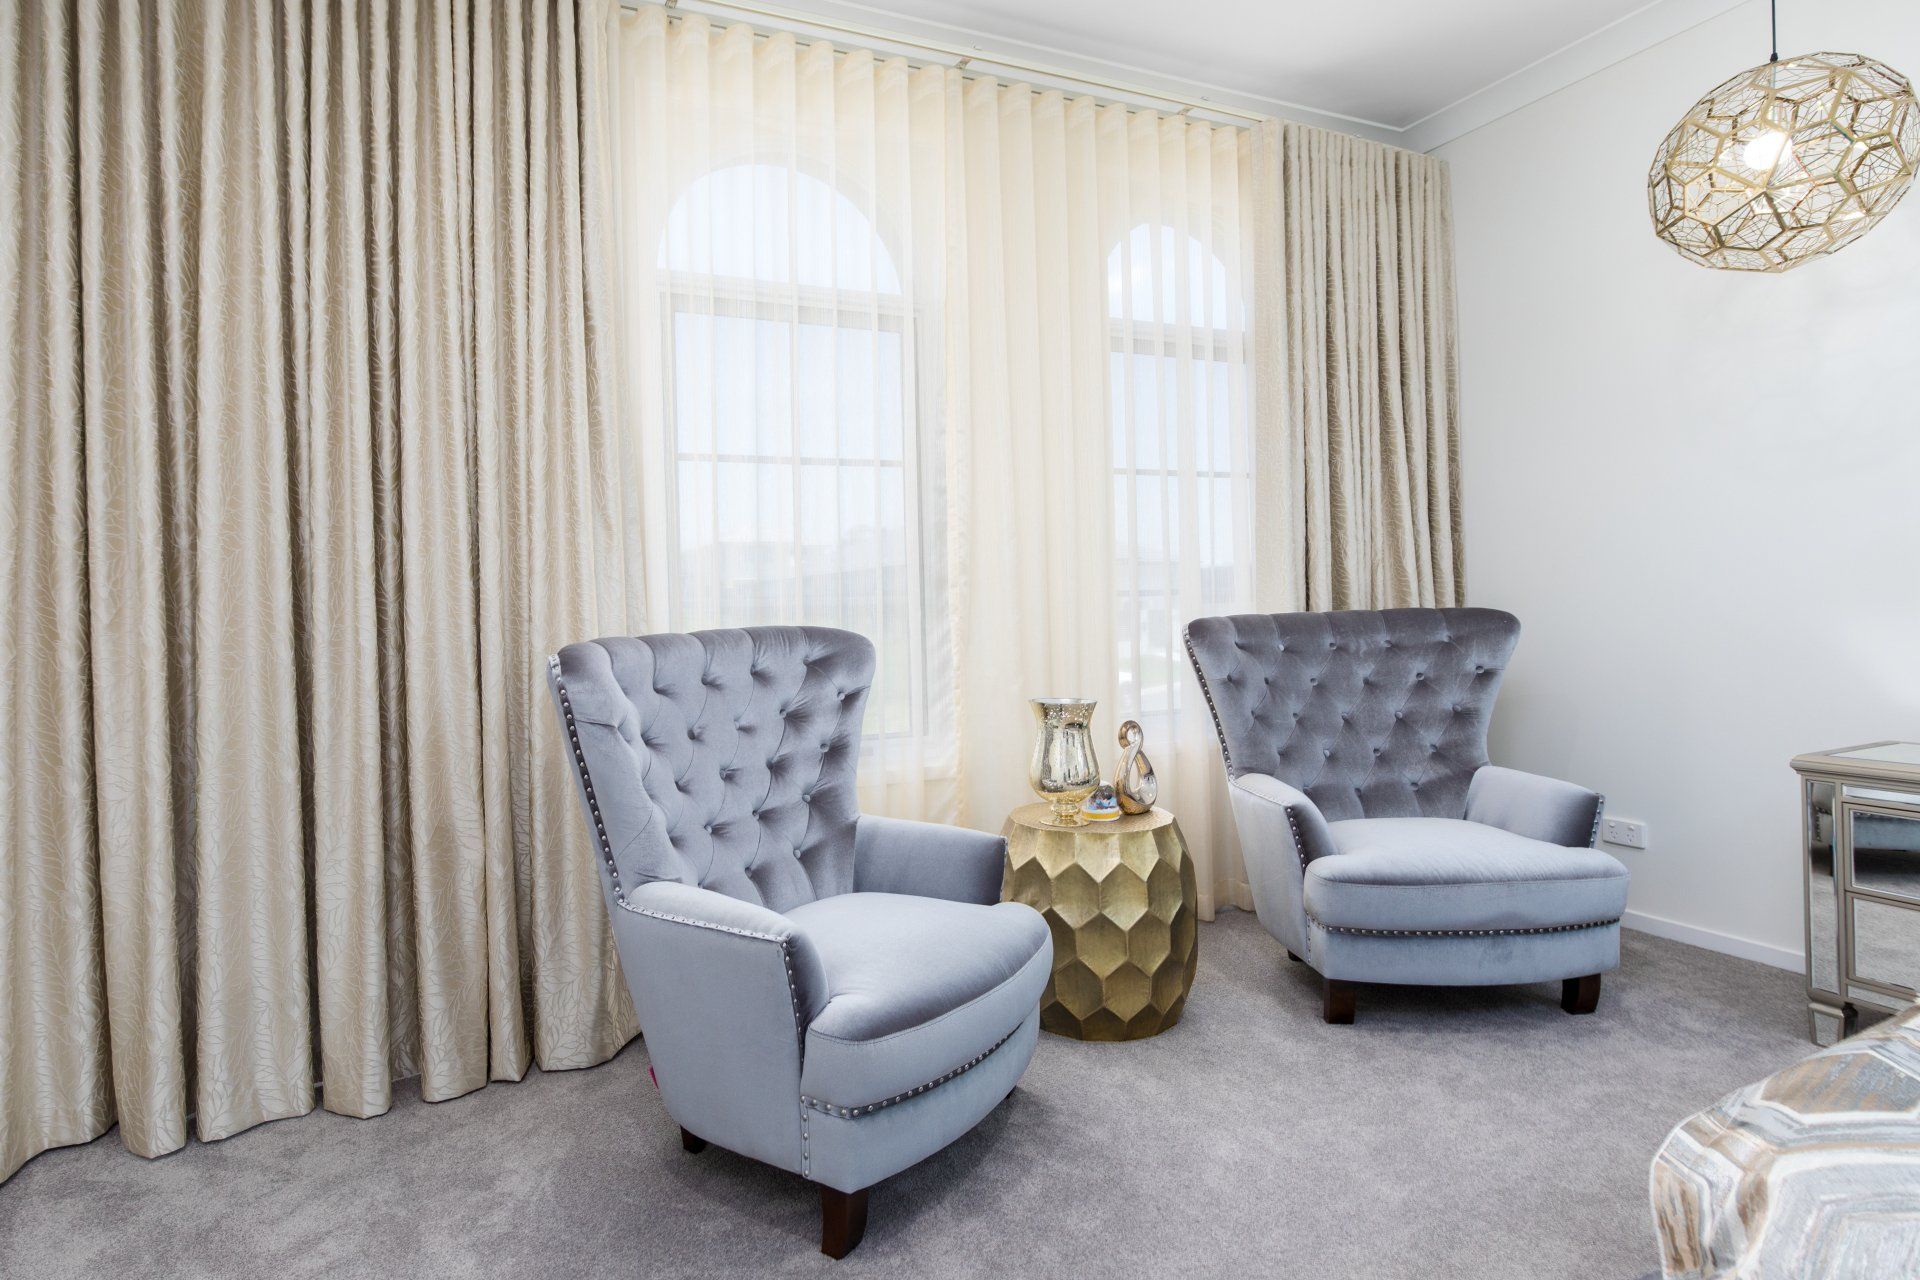 Quality Curtains & Blinds Ipswich